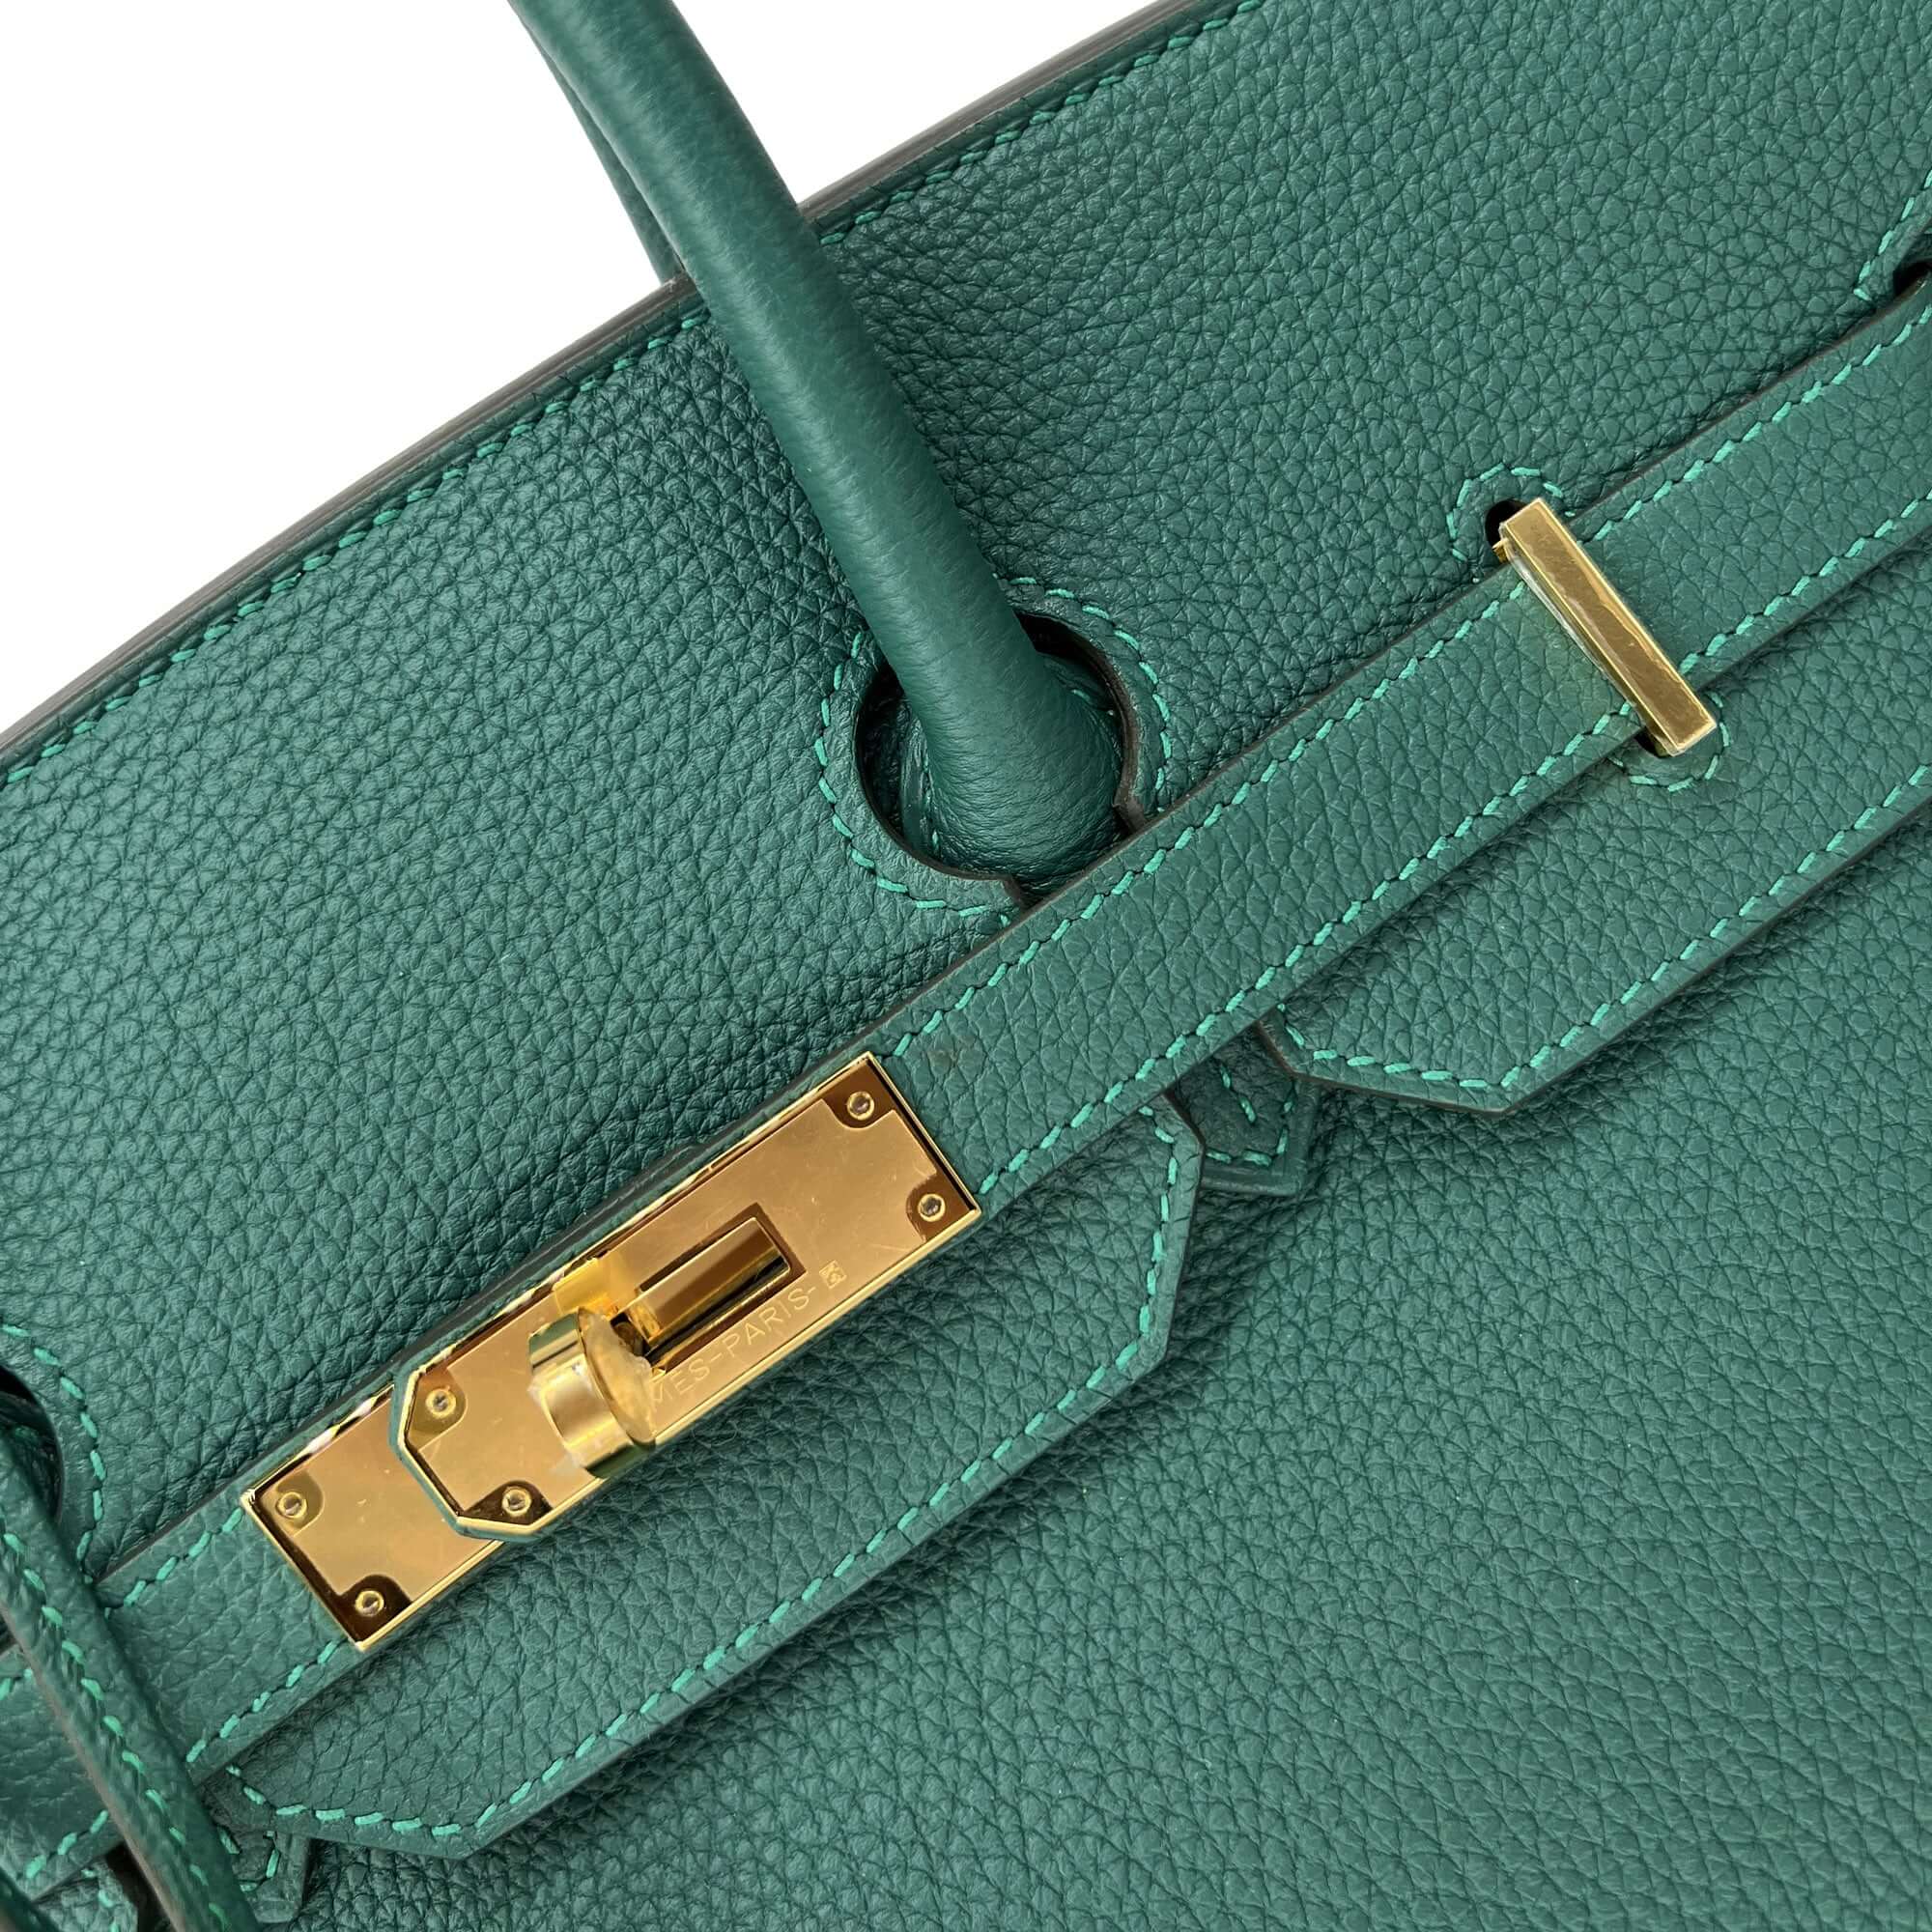 Sold at Auction: Hermes 35cm Malachite Togo Leather Kelly Bag GHW